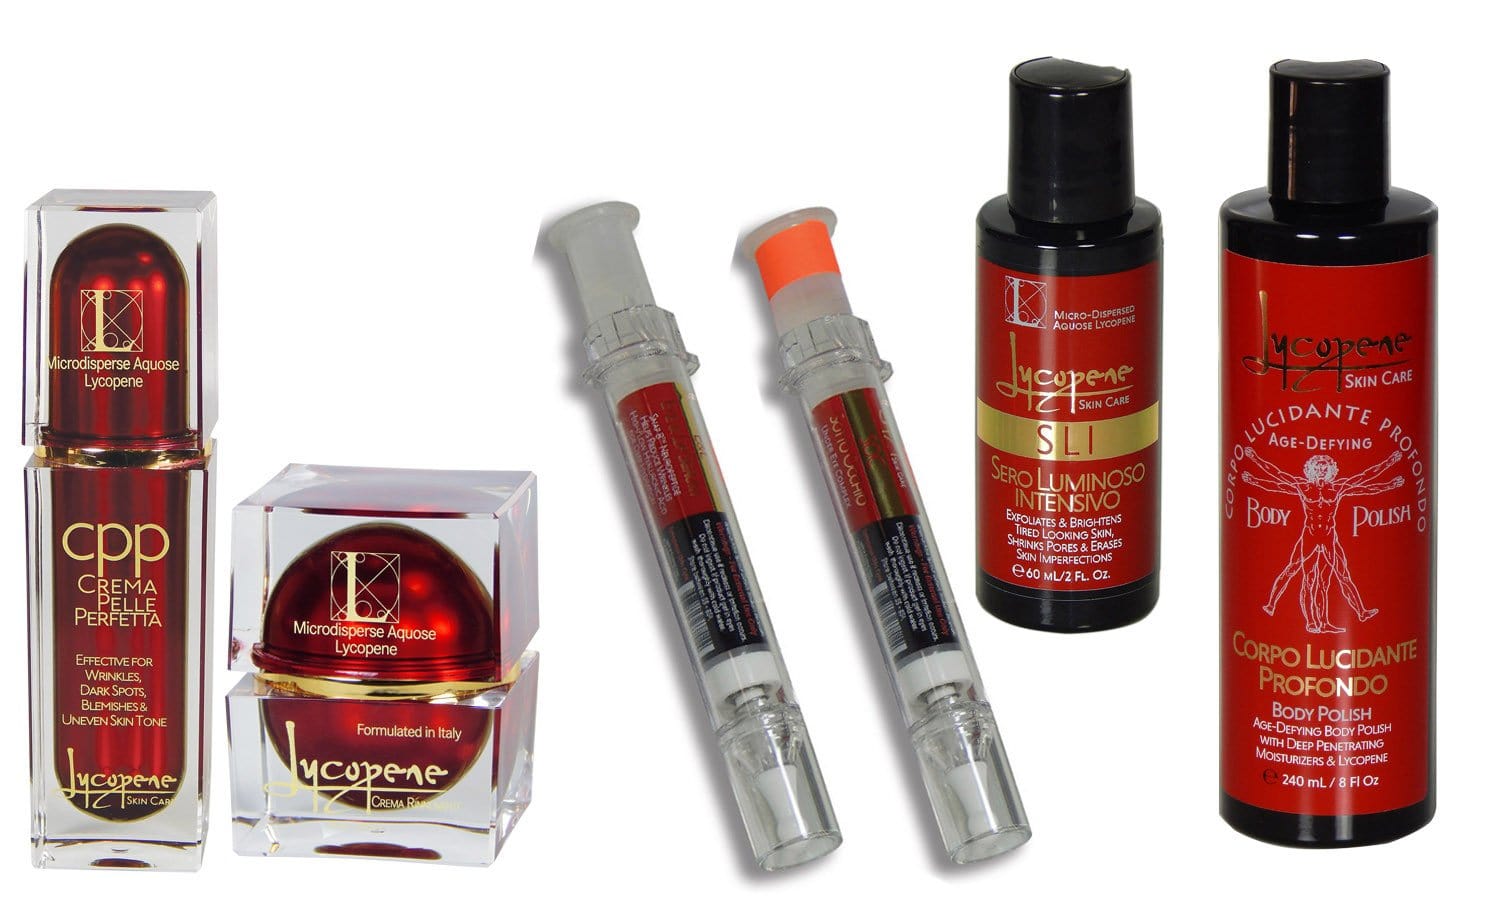 Set of 7 Products The Complete Set of All Lycopene Based Products - Save 40%